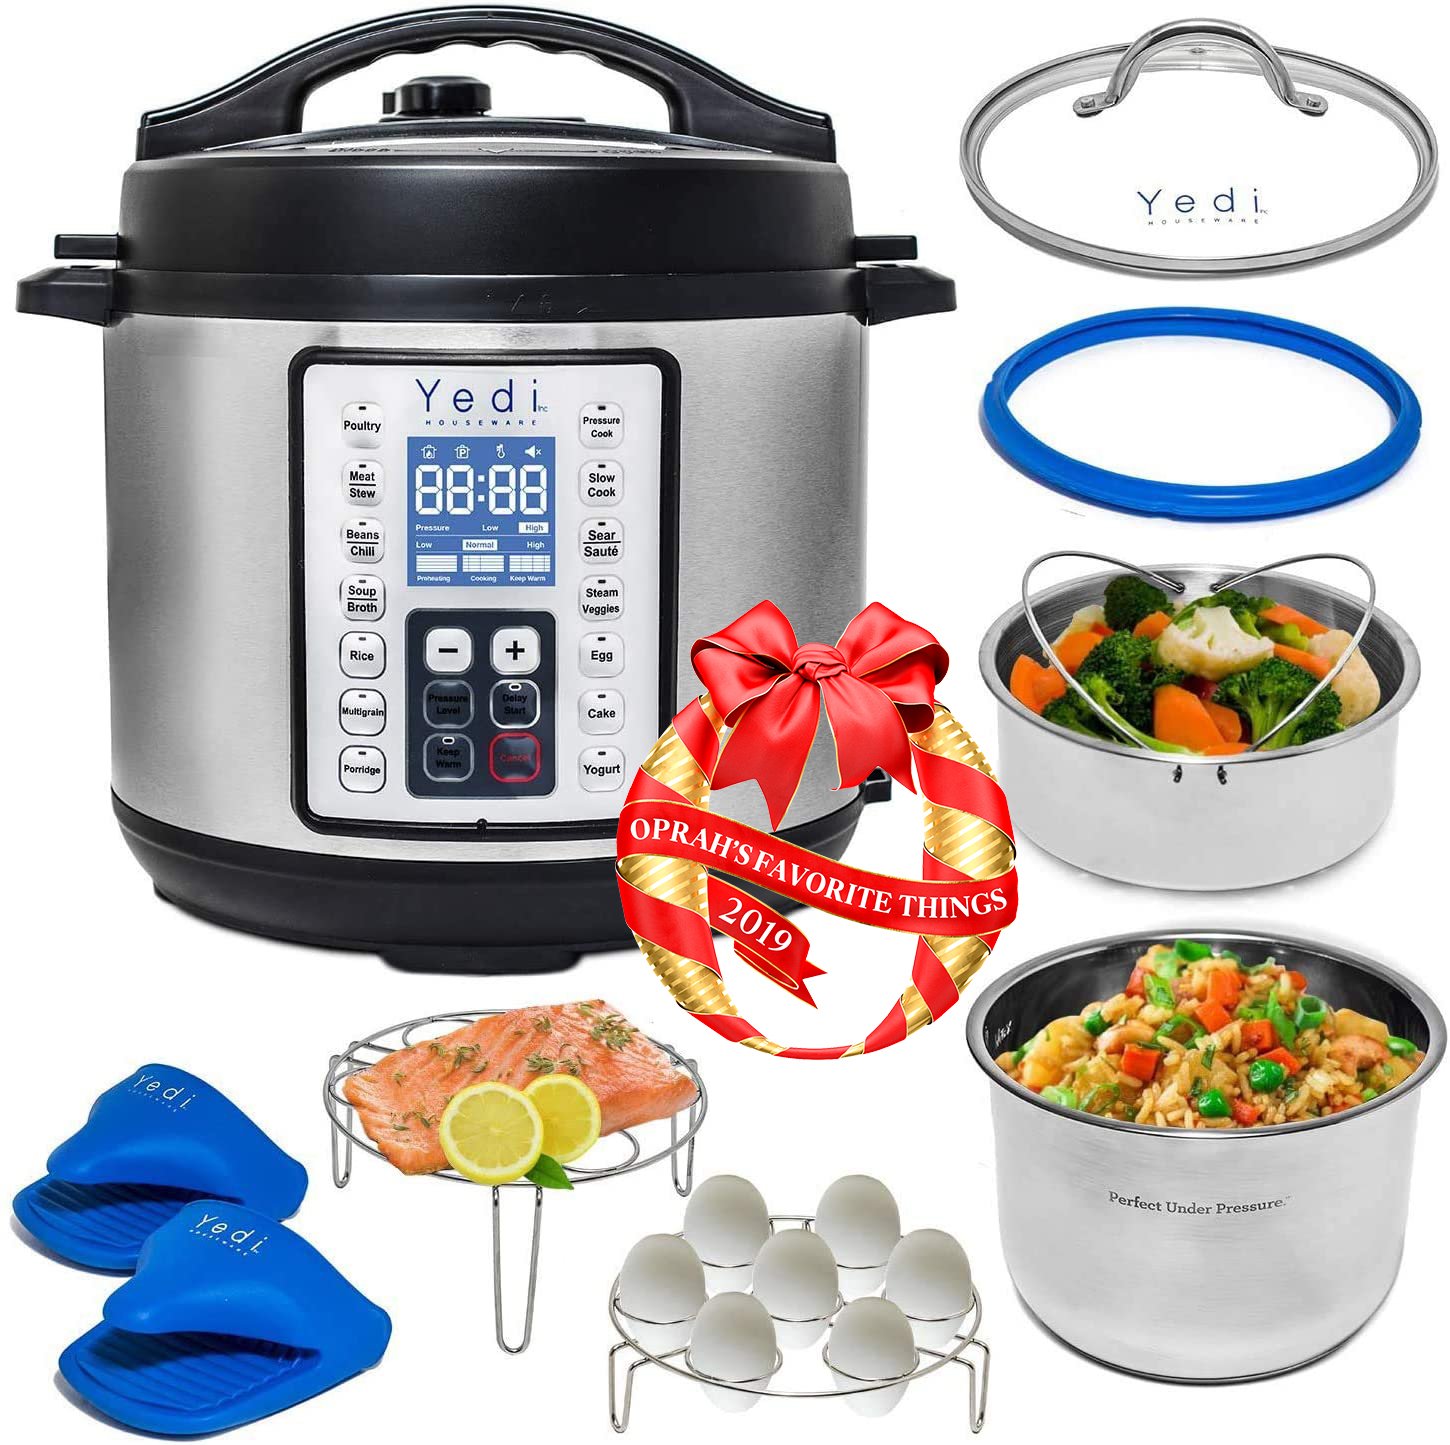 Aobosi Pressure Cooker 8QT HIGH Power 8-in-1 Electric Multi-cooker,Rice Cooker,Slow Cooker,Sauté,Yogurt Maker,Warmer 6 Pressure Levels,Free Accessories Included,Stainless Steel Pot & Housing 